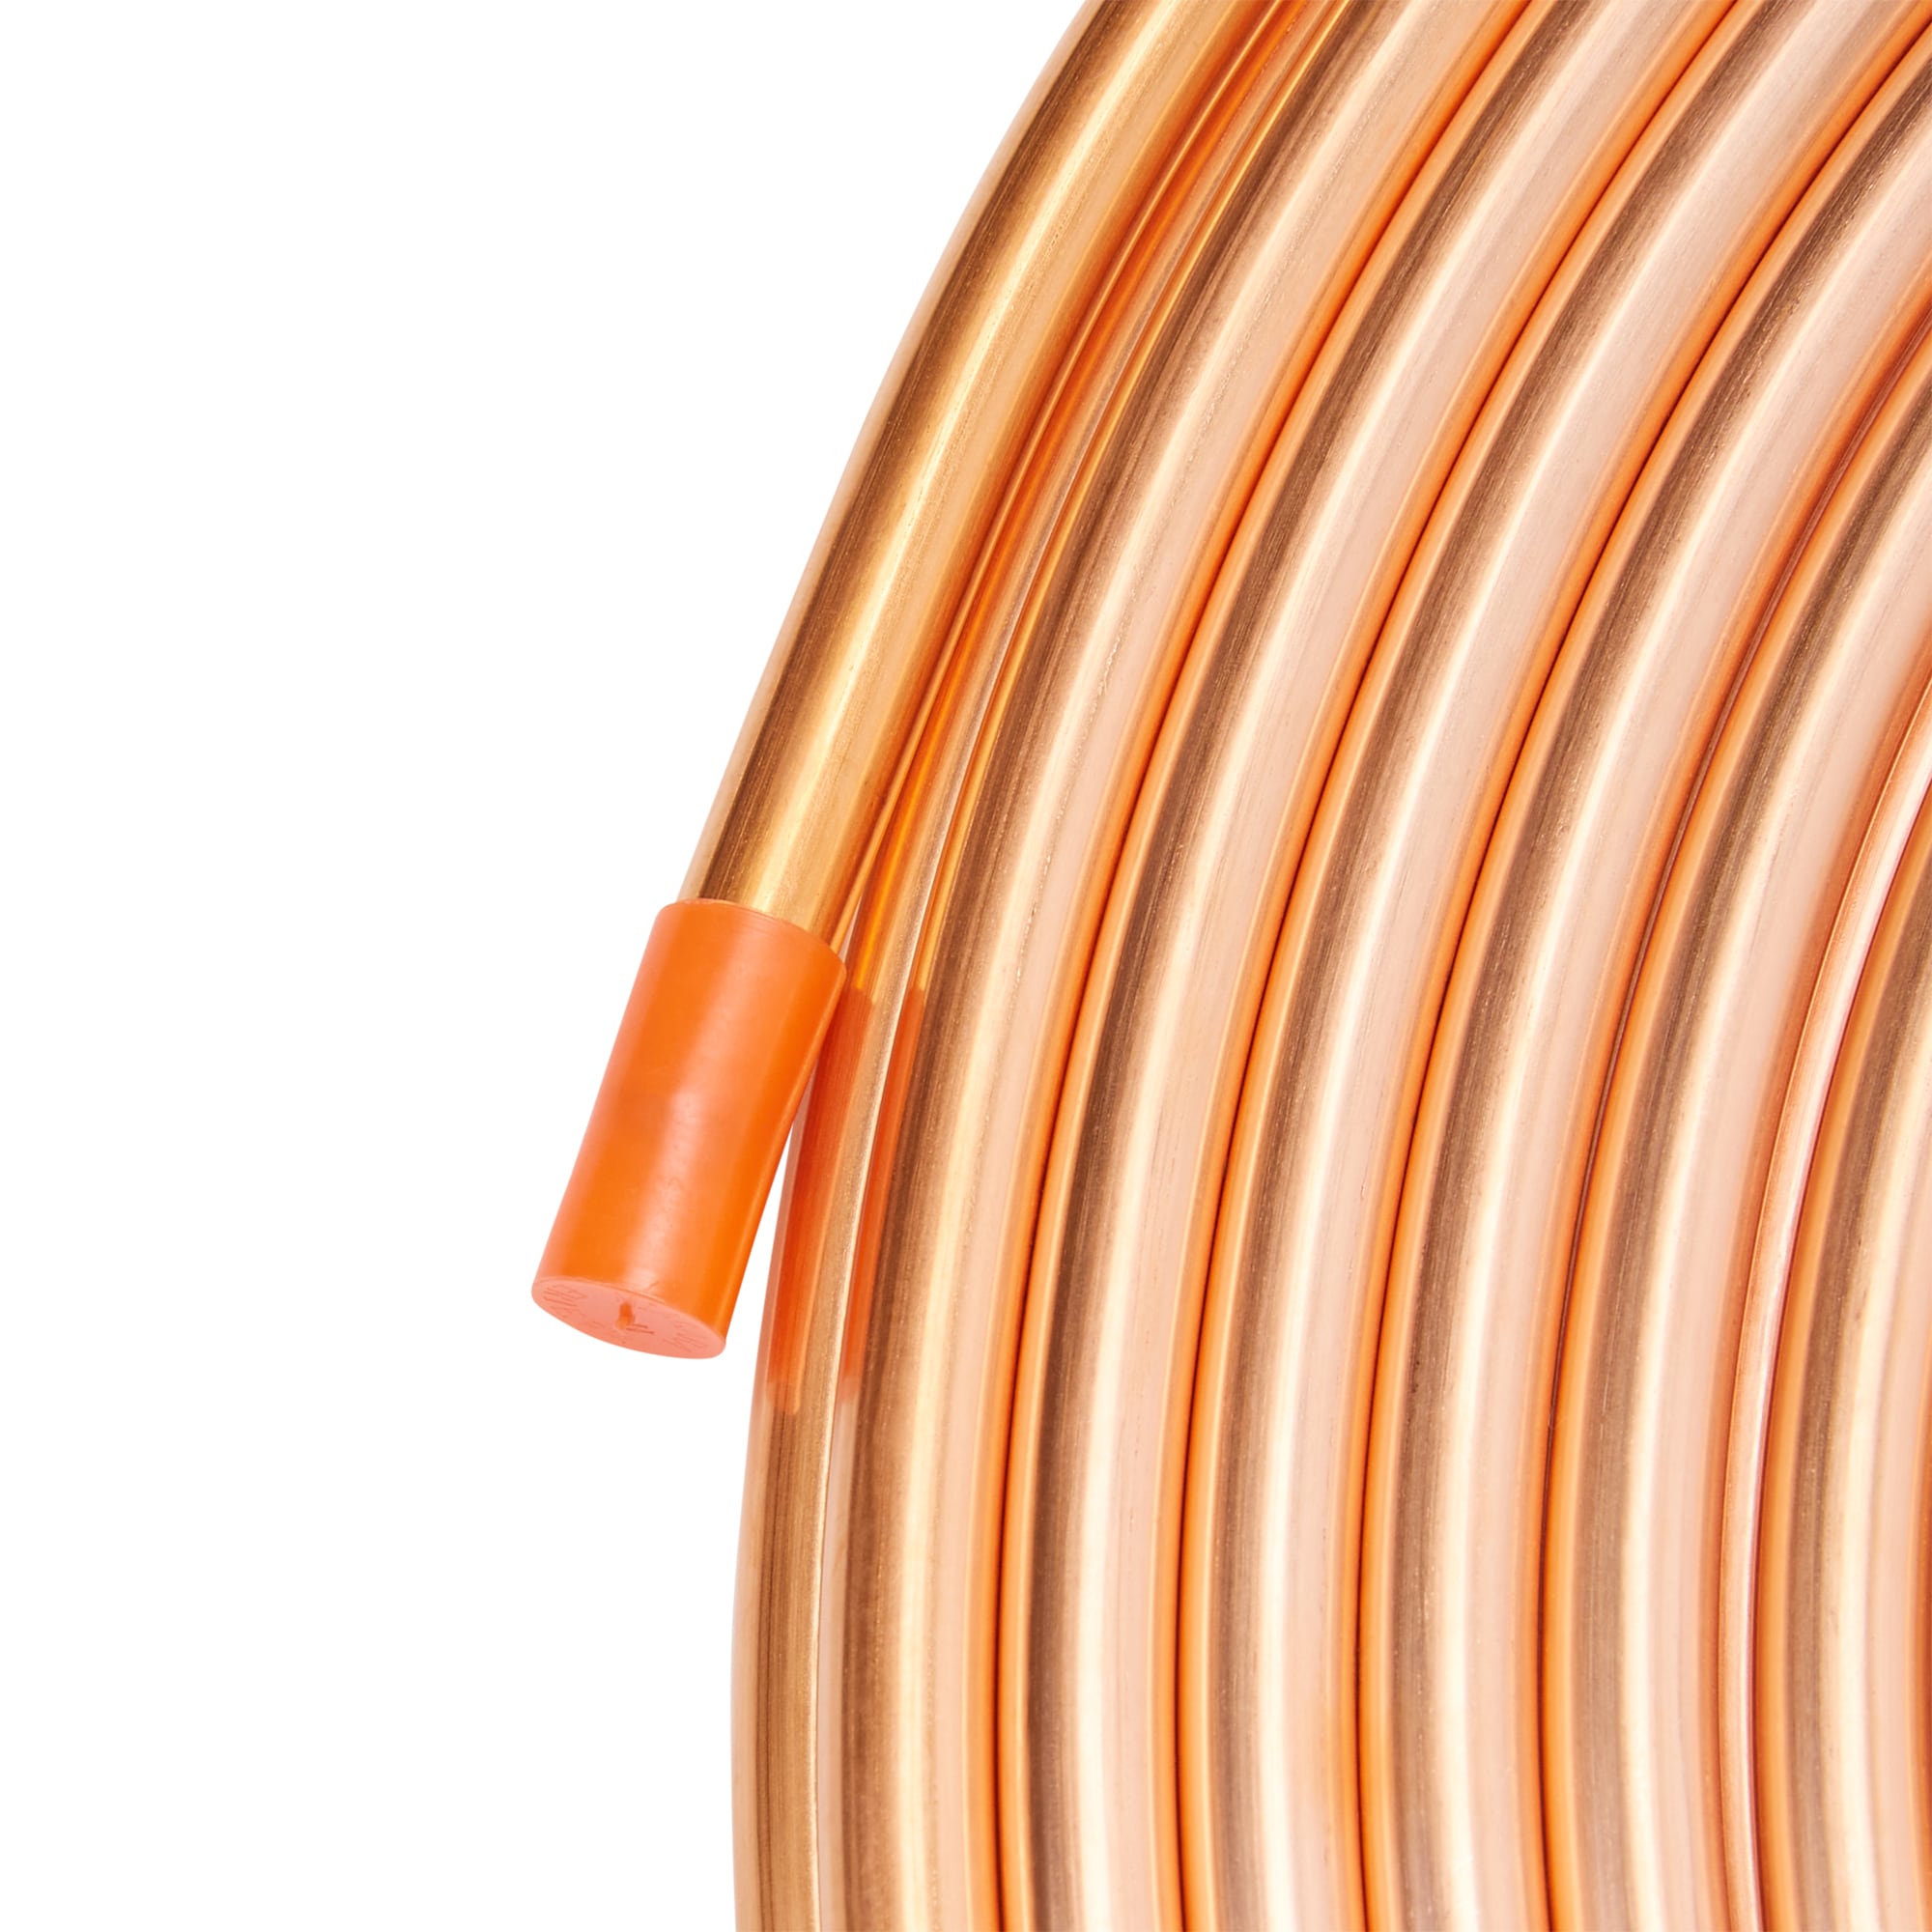 er ca 31cm Poolheizung Spirale data-mtsrclang=en-US href=# onclick=return false; 							show original title Details about   Spiral copper pipe 18x1mm from 10m outside diameter approx 31cm Pool Heater coil 